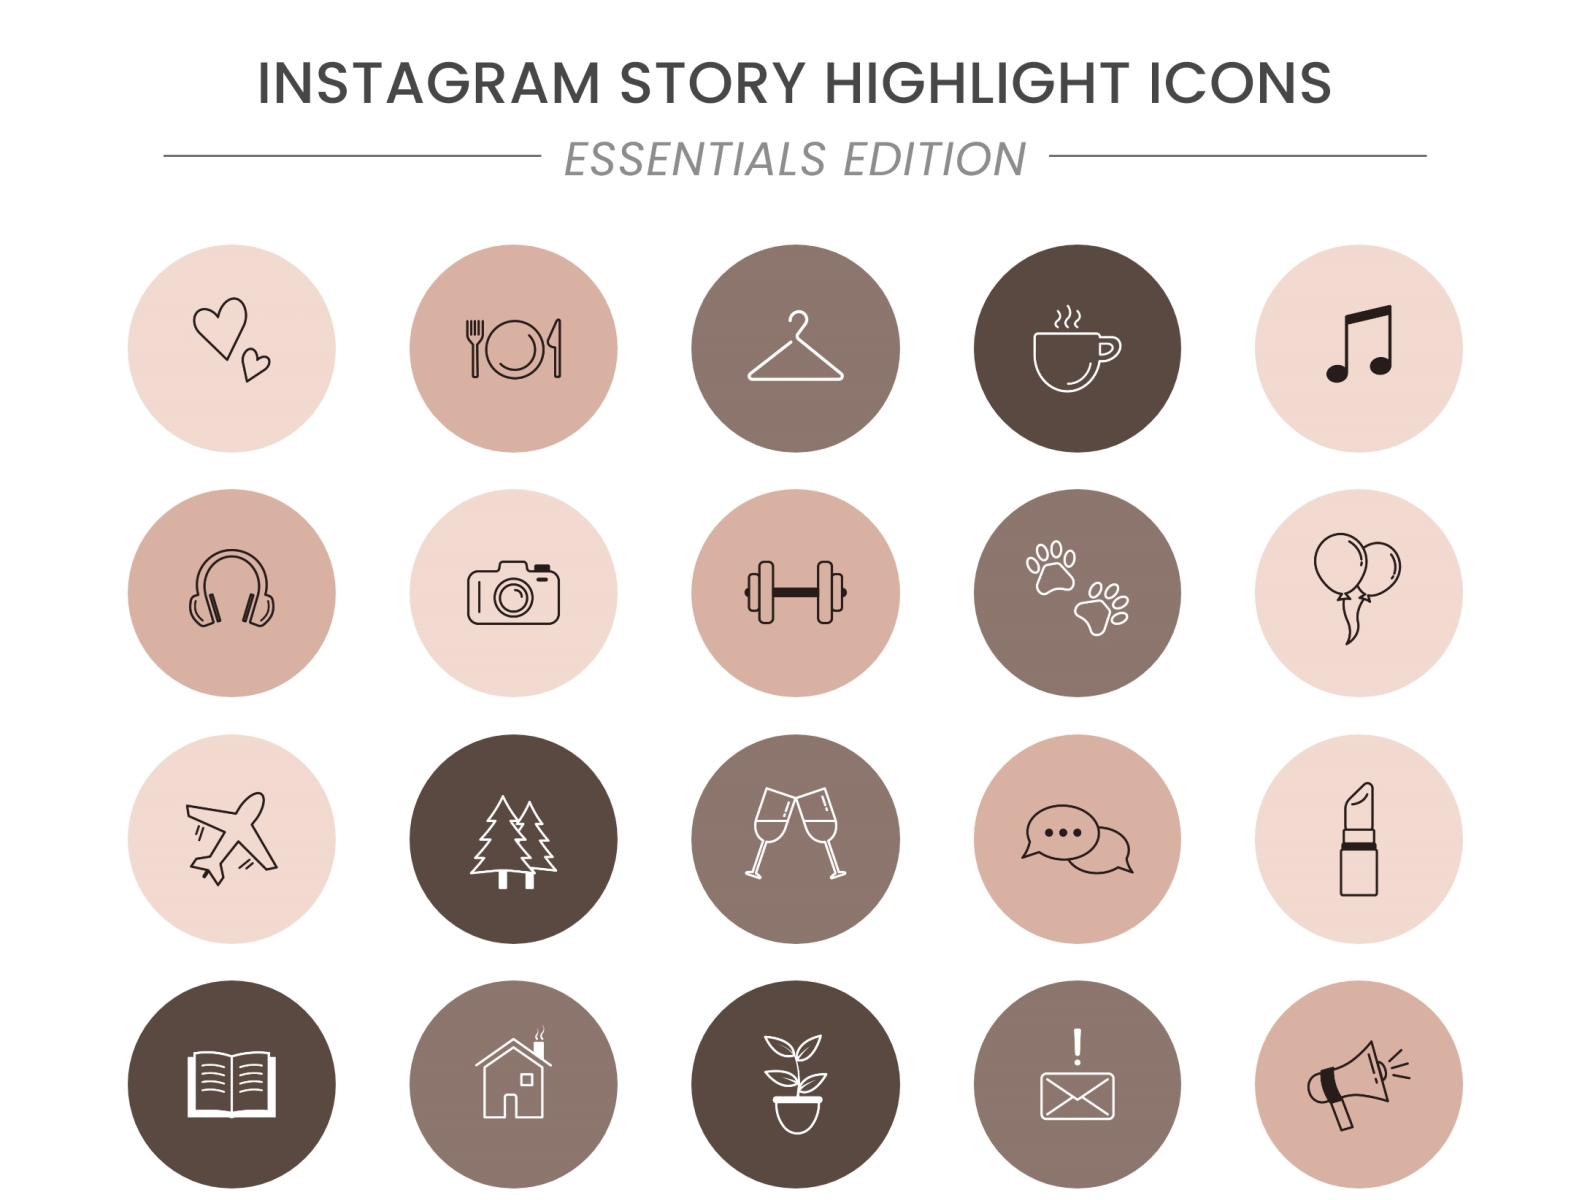 Instagram Story Highlight Icon Set by Clara Fetherston on Dribbble